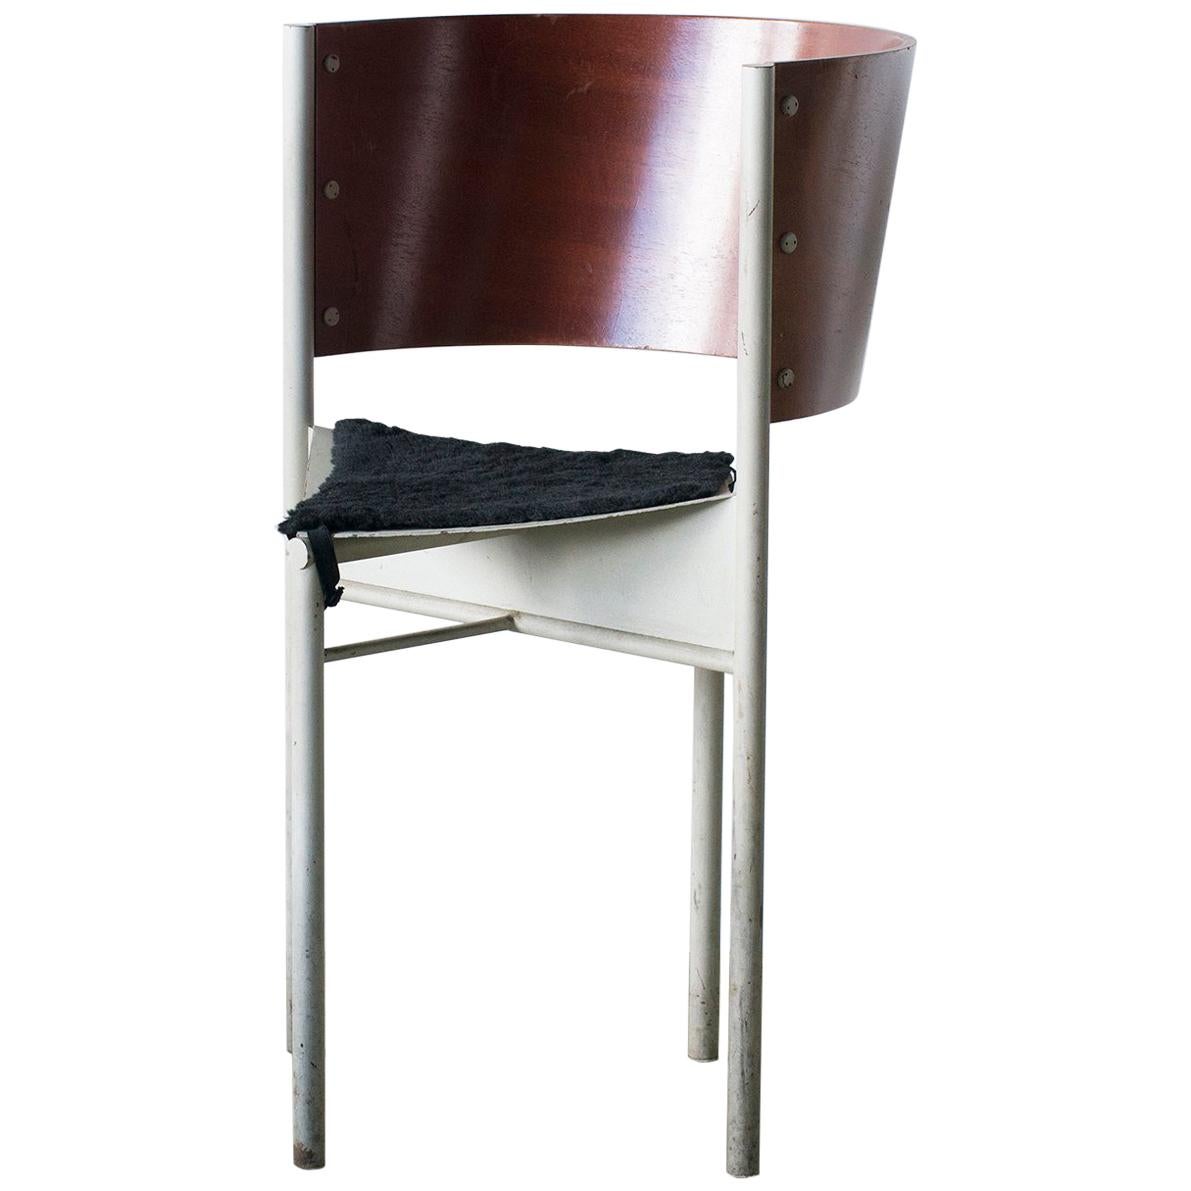 Chair for Cafe Mystique Philippe Starck